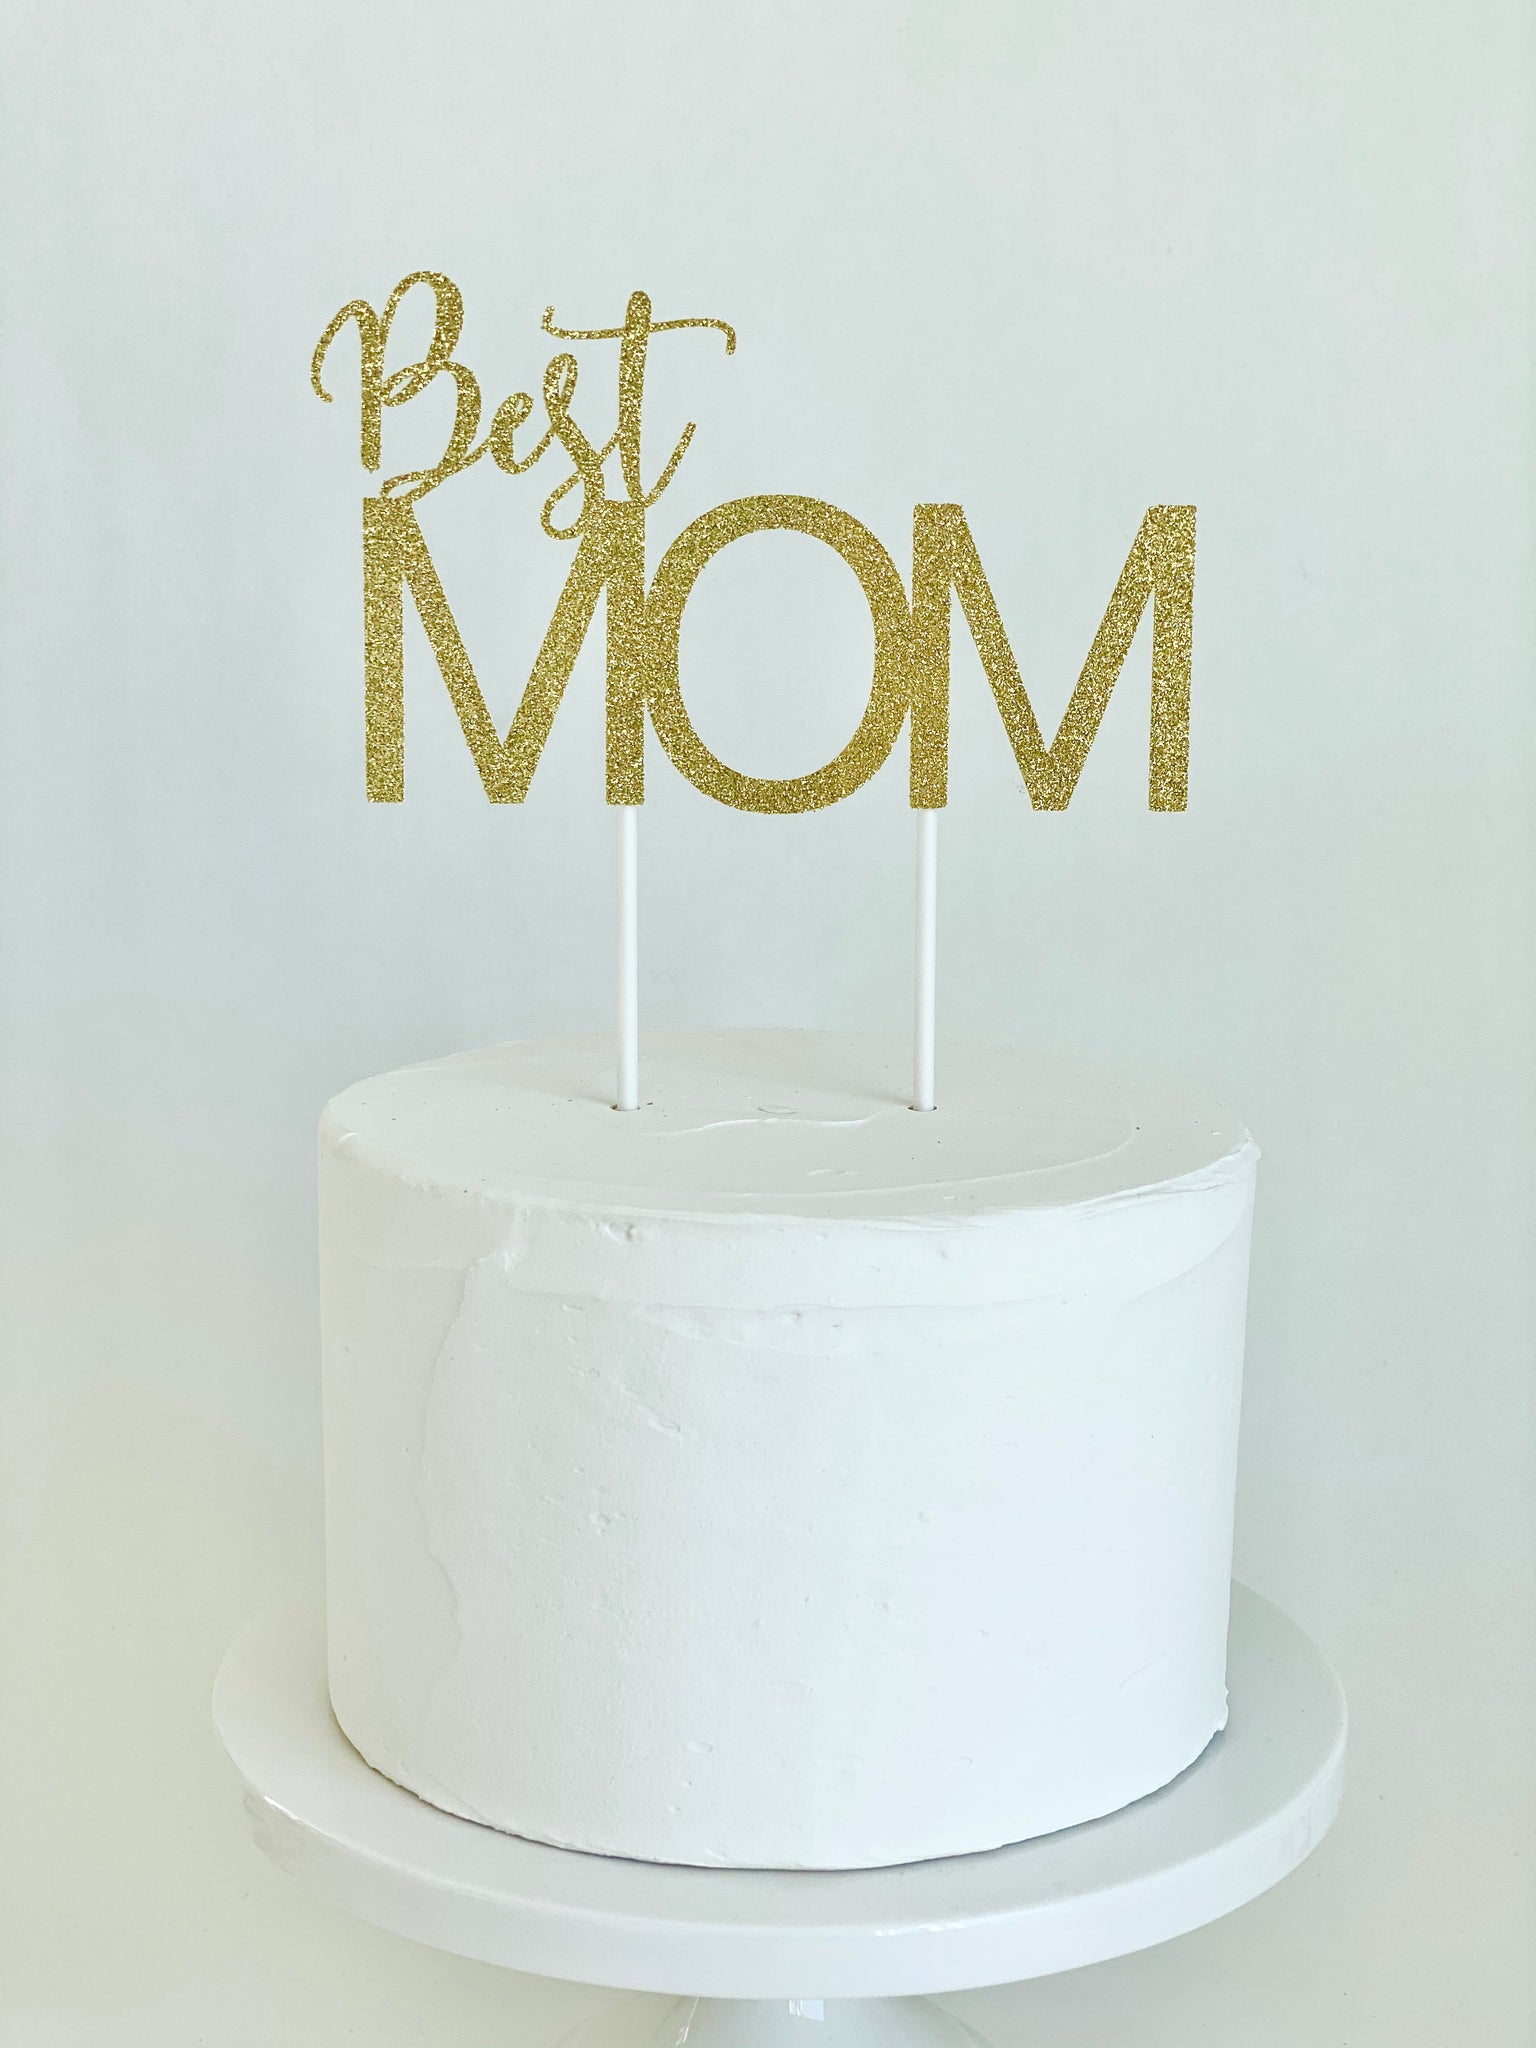 Aggregate more than 90 best cake designs for mom - in.daotaonec